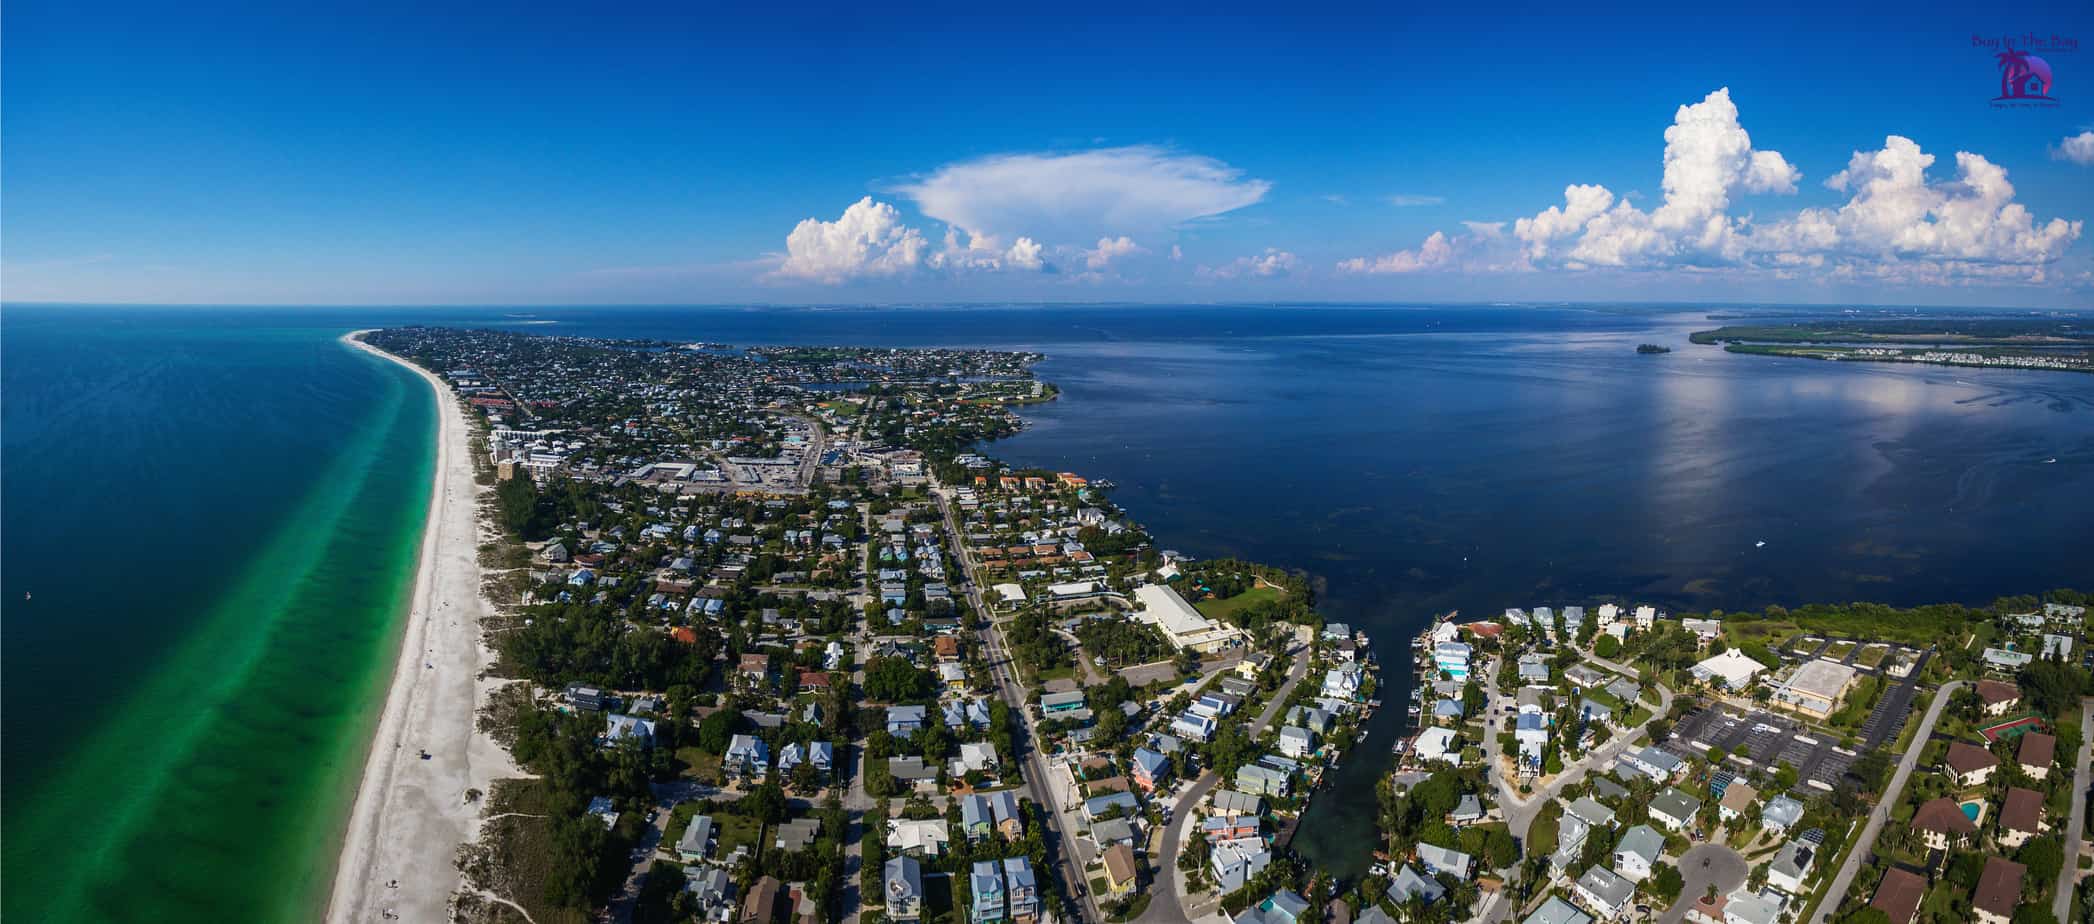 Ariel view of beach and houses on gulf of mexico in Anna Maria Island in Manatee County Florida